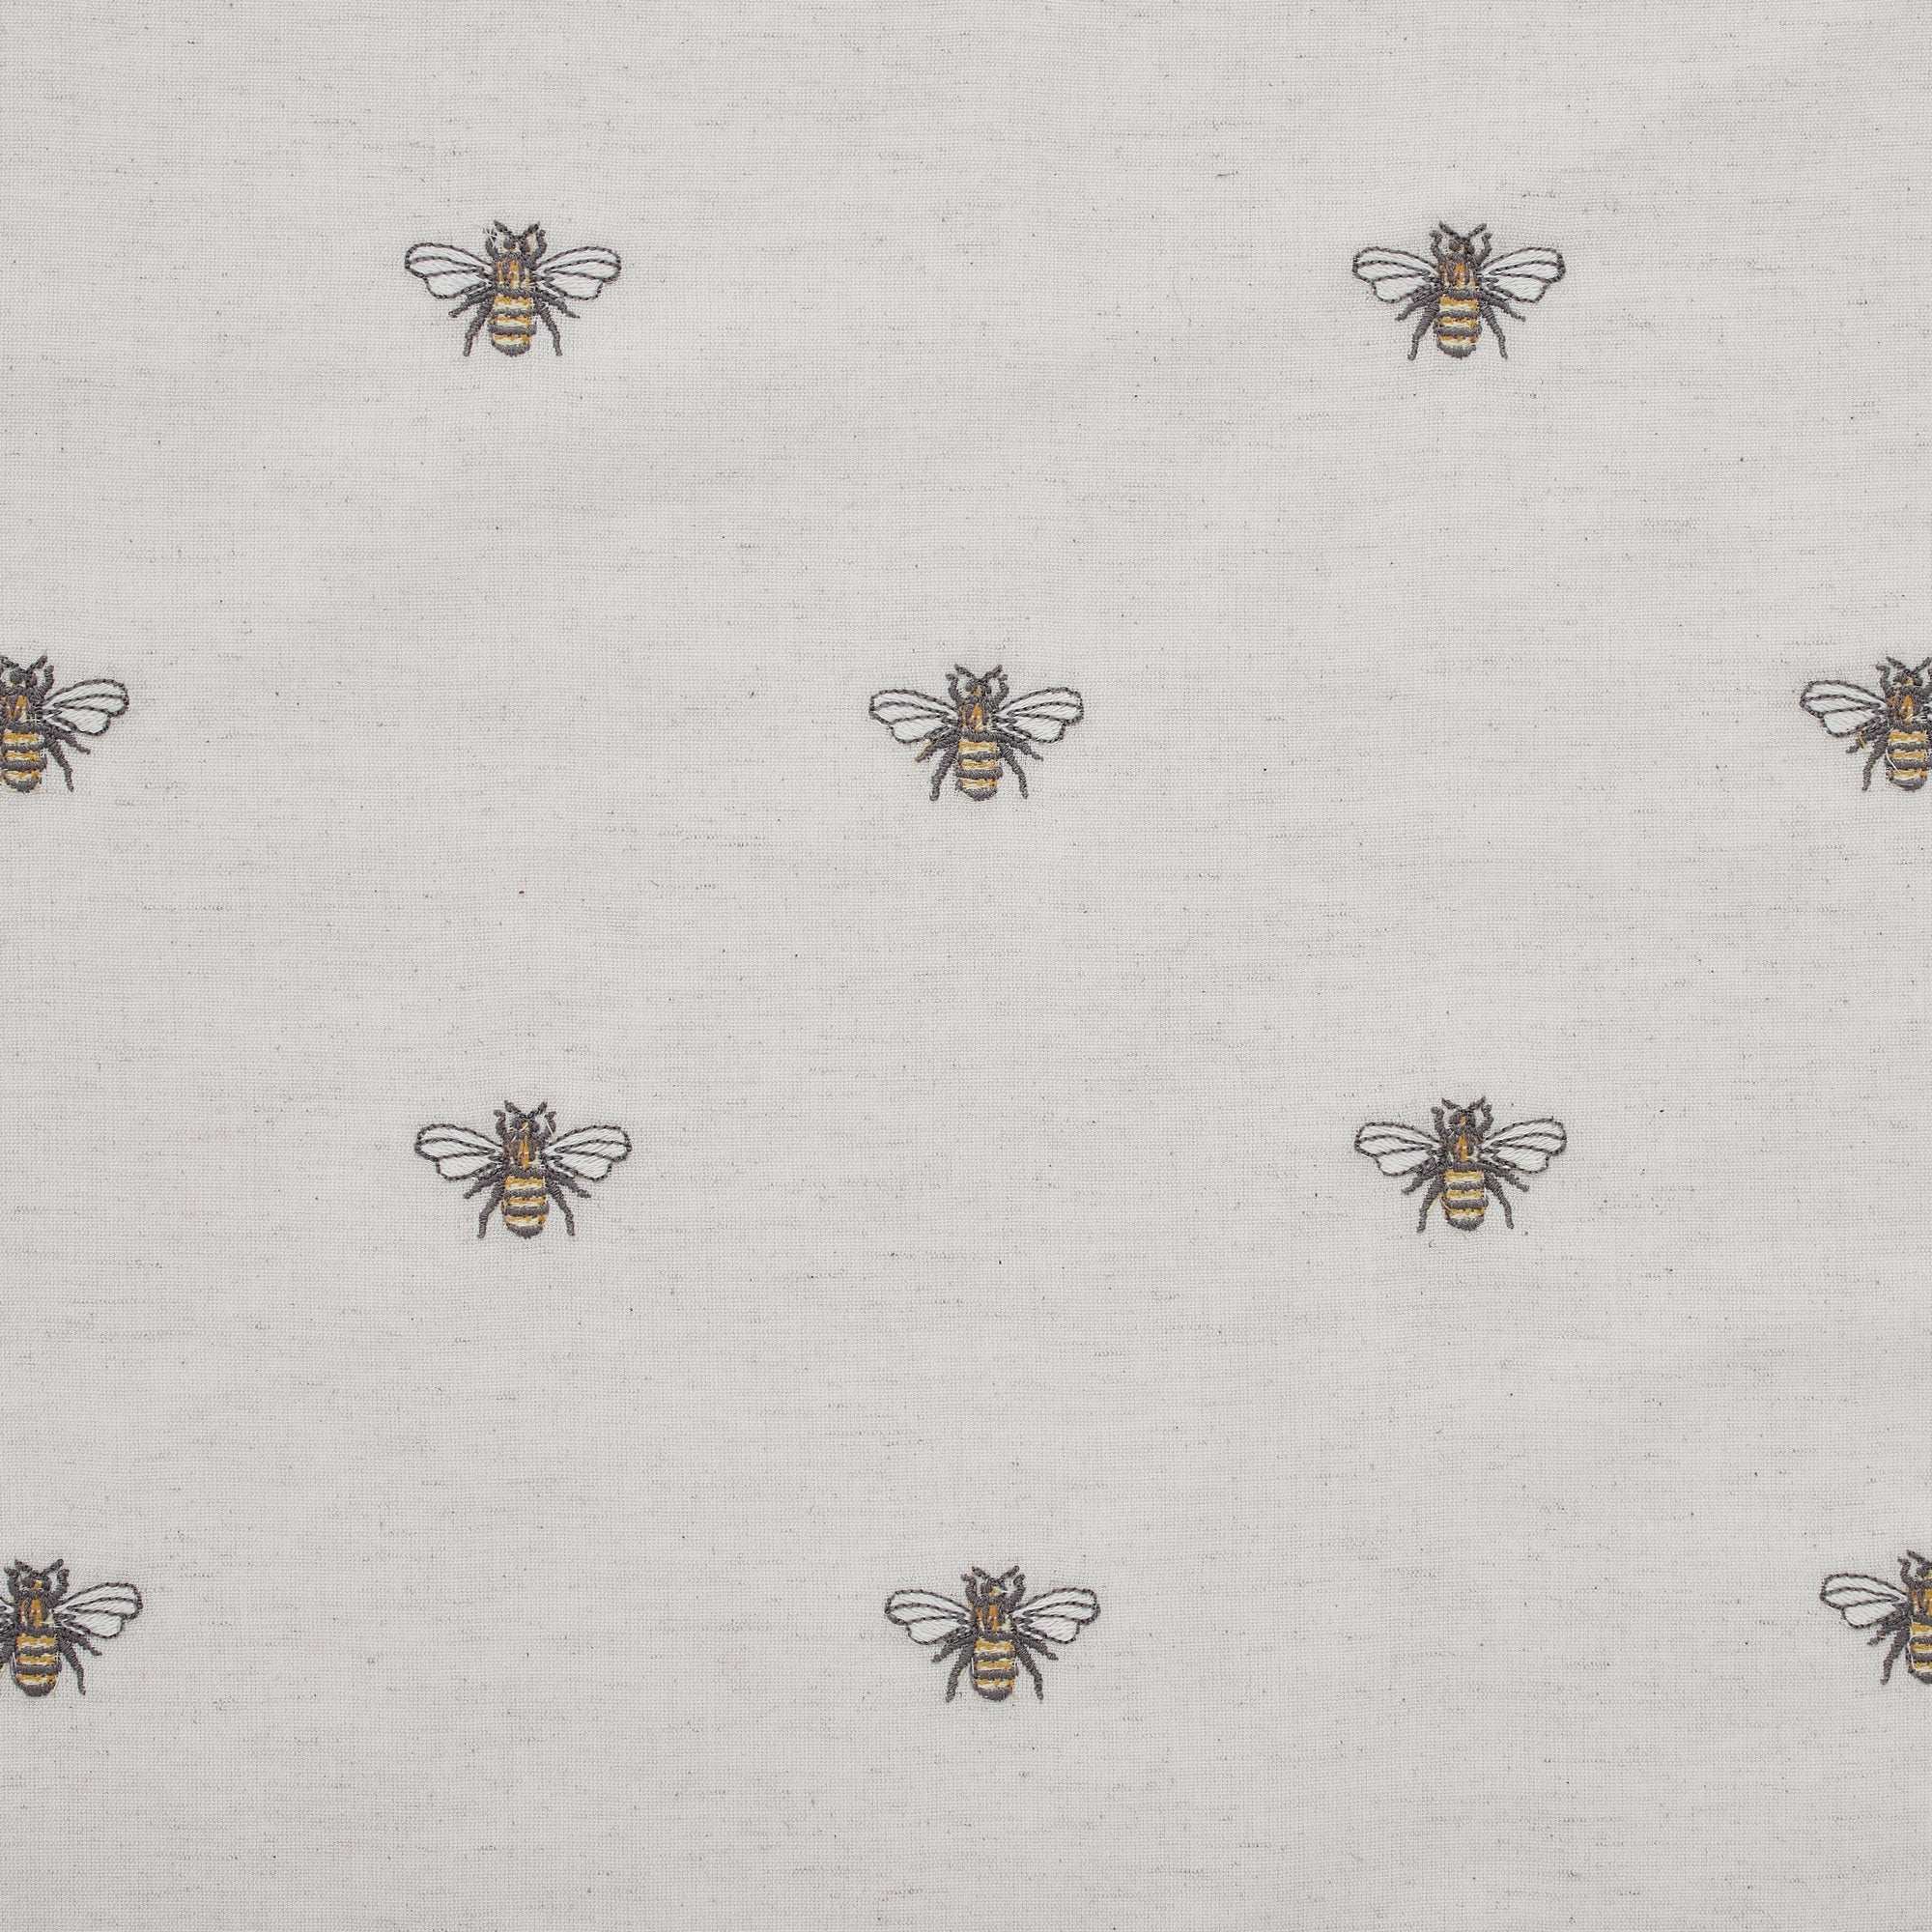 Embroidered Bee Table Runner 13x72 VHC Brands